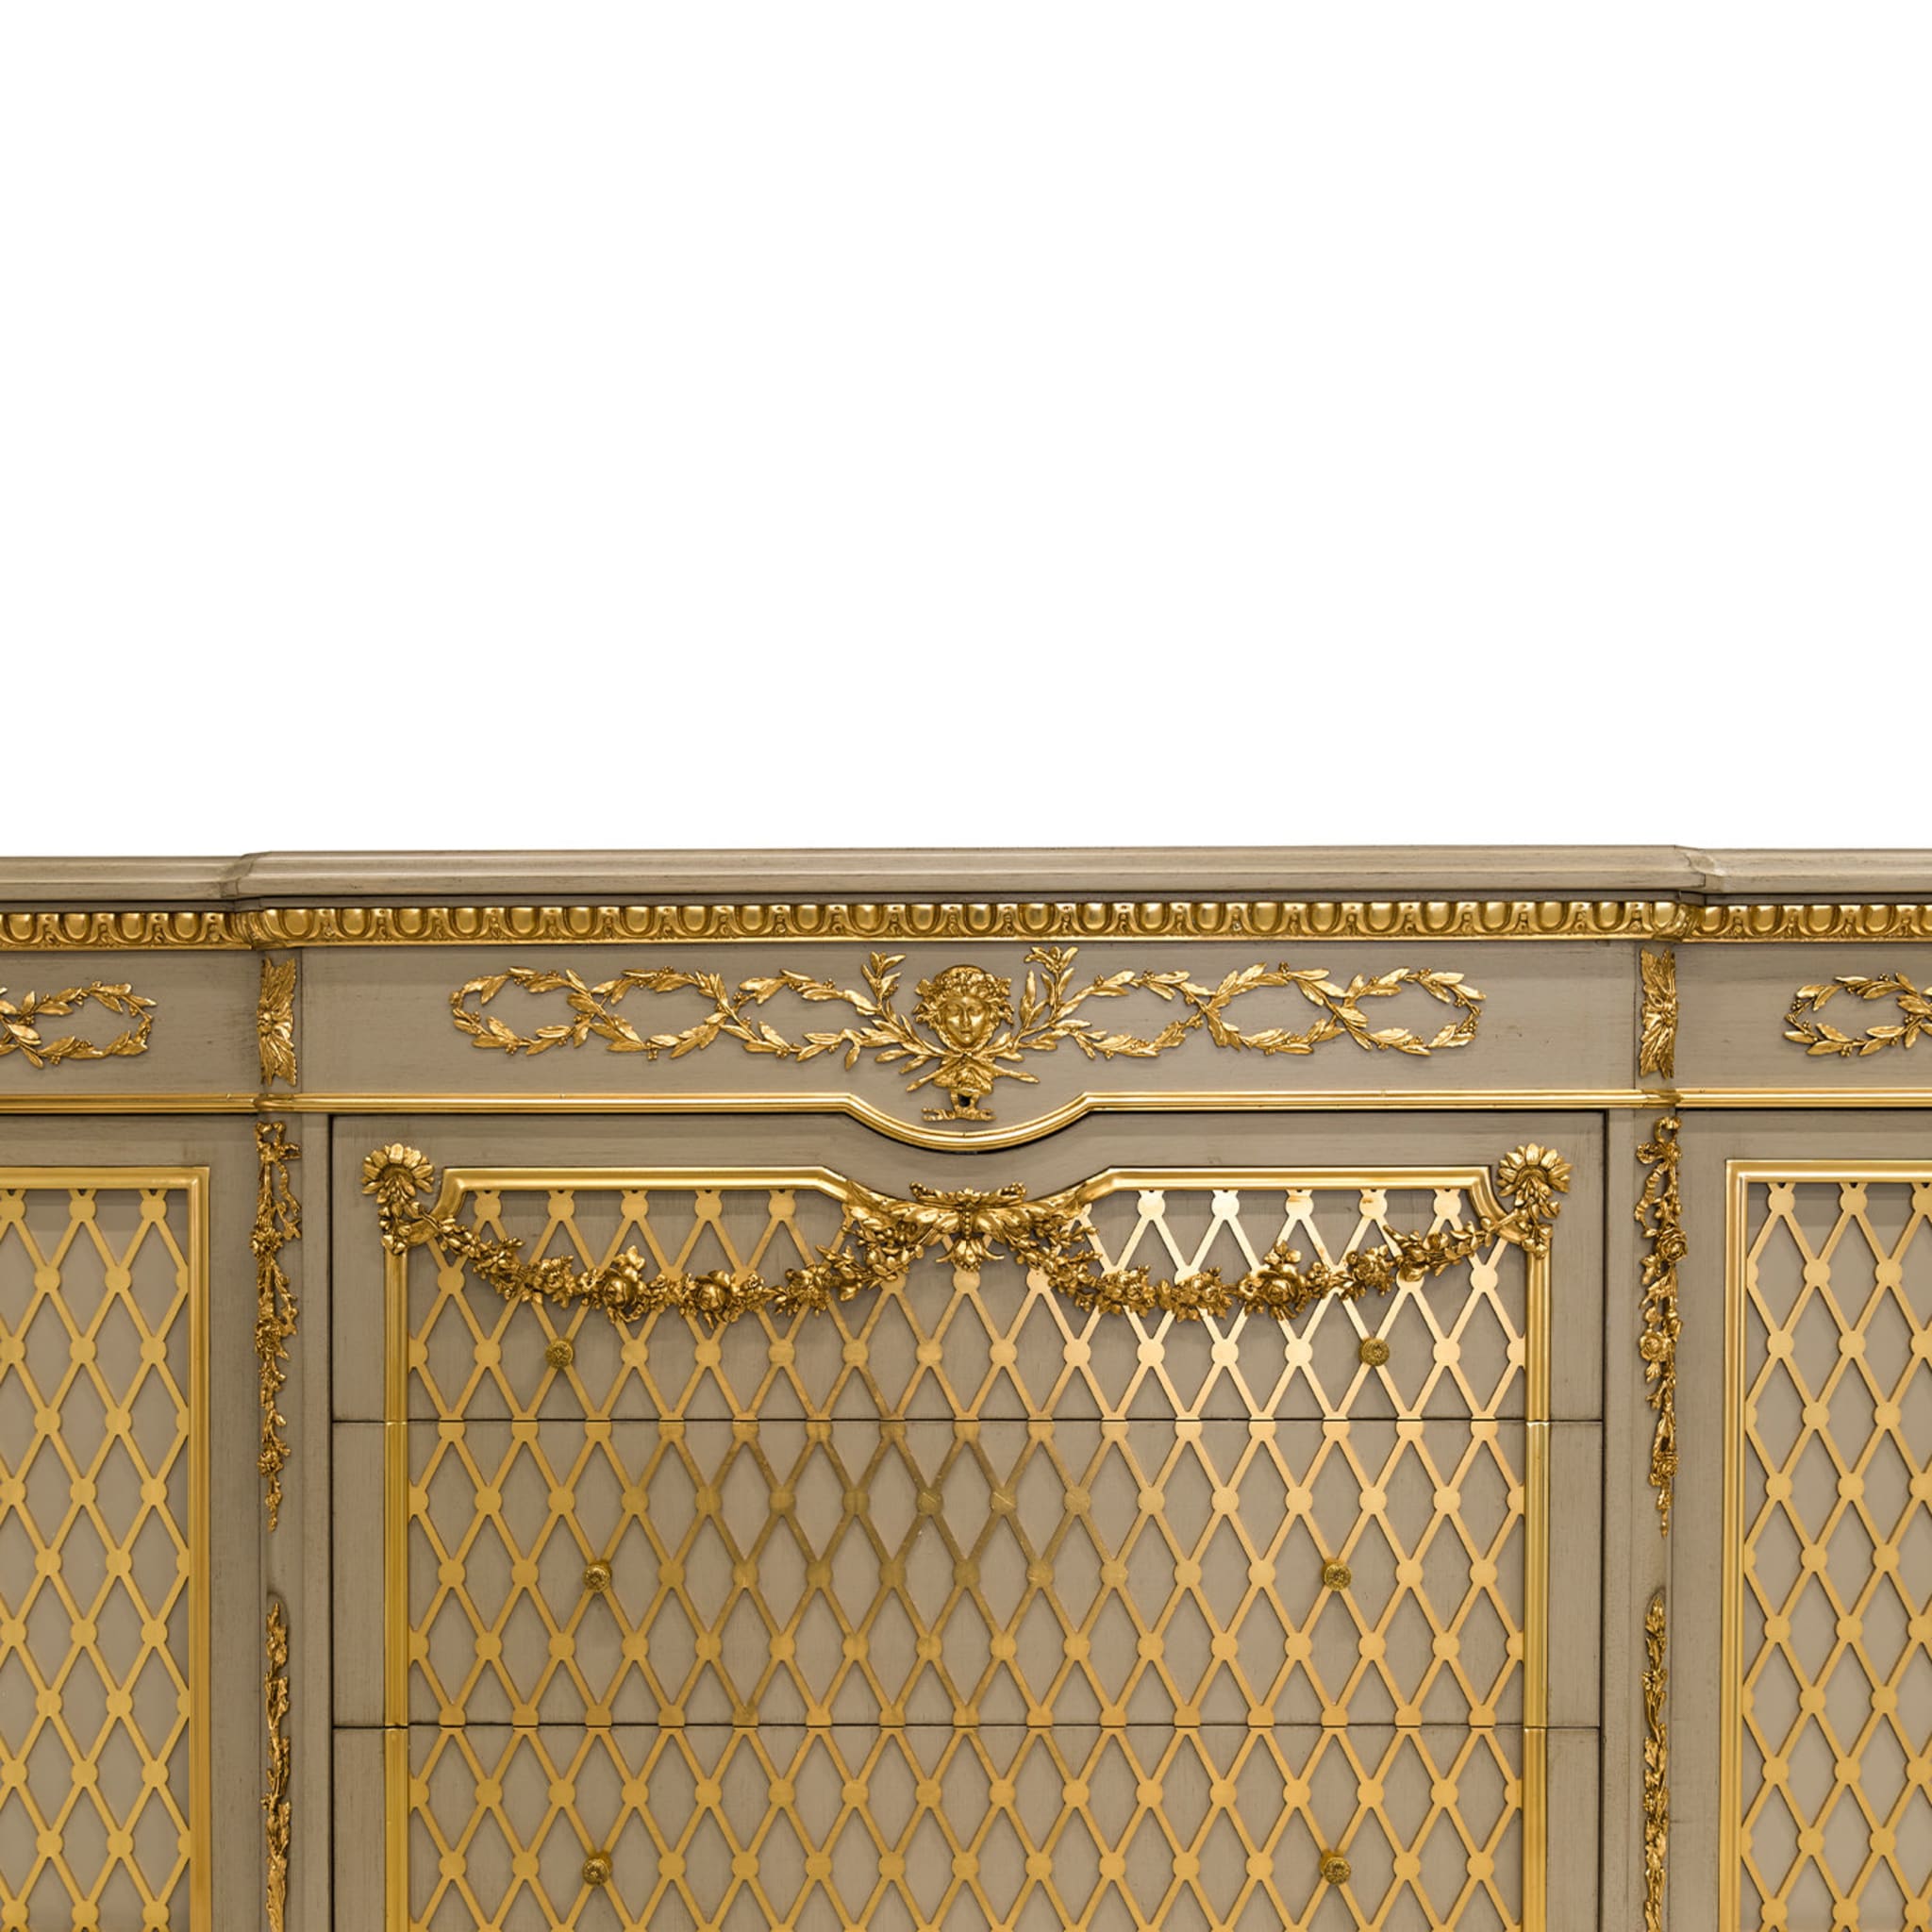 FRENCH TRANSITIONAL STYLE SIDEBOARD - Alternative view 1